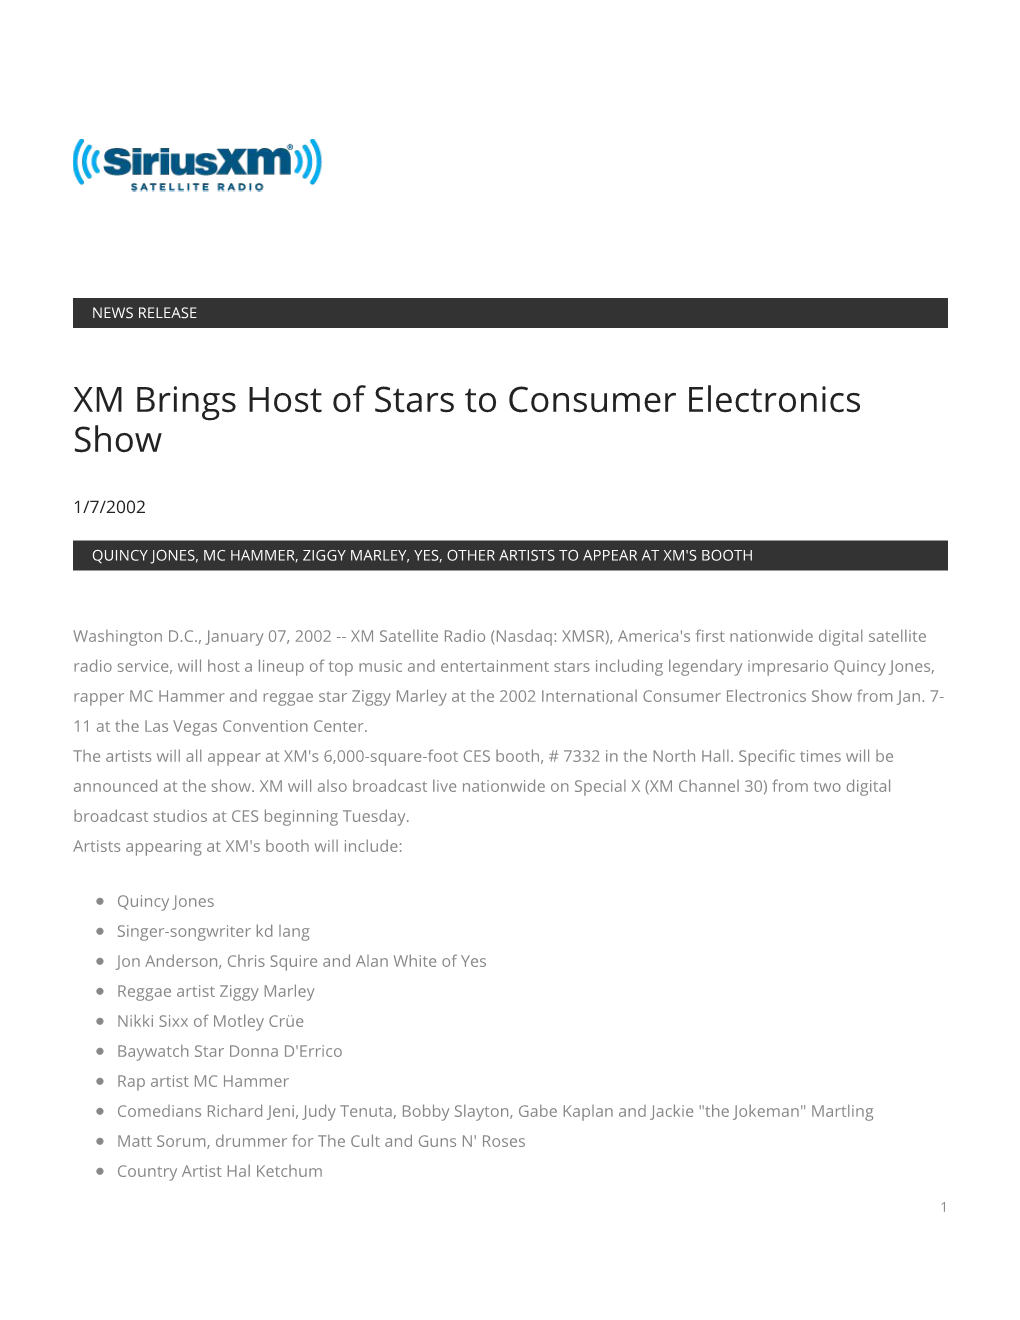 XM Brings Host of Stars to Consumer Electronics Show